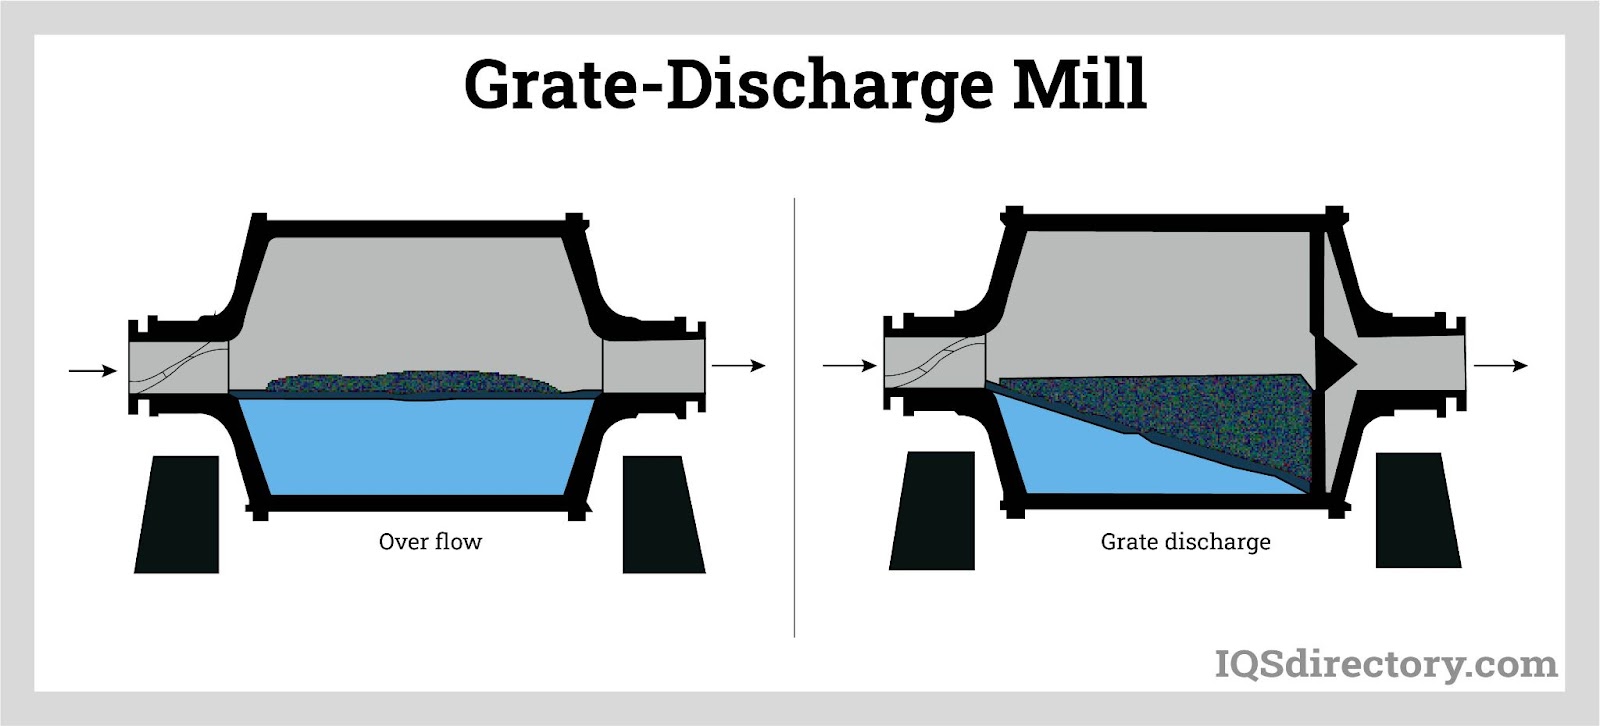 Grate-Discharge Mill